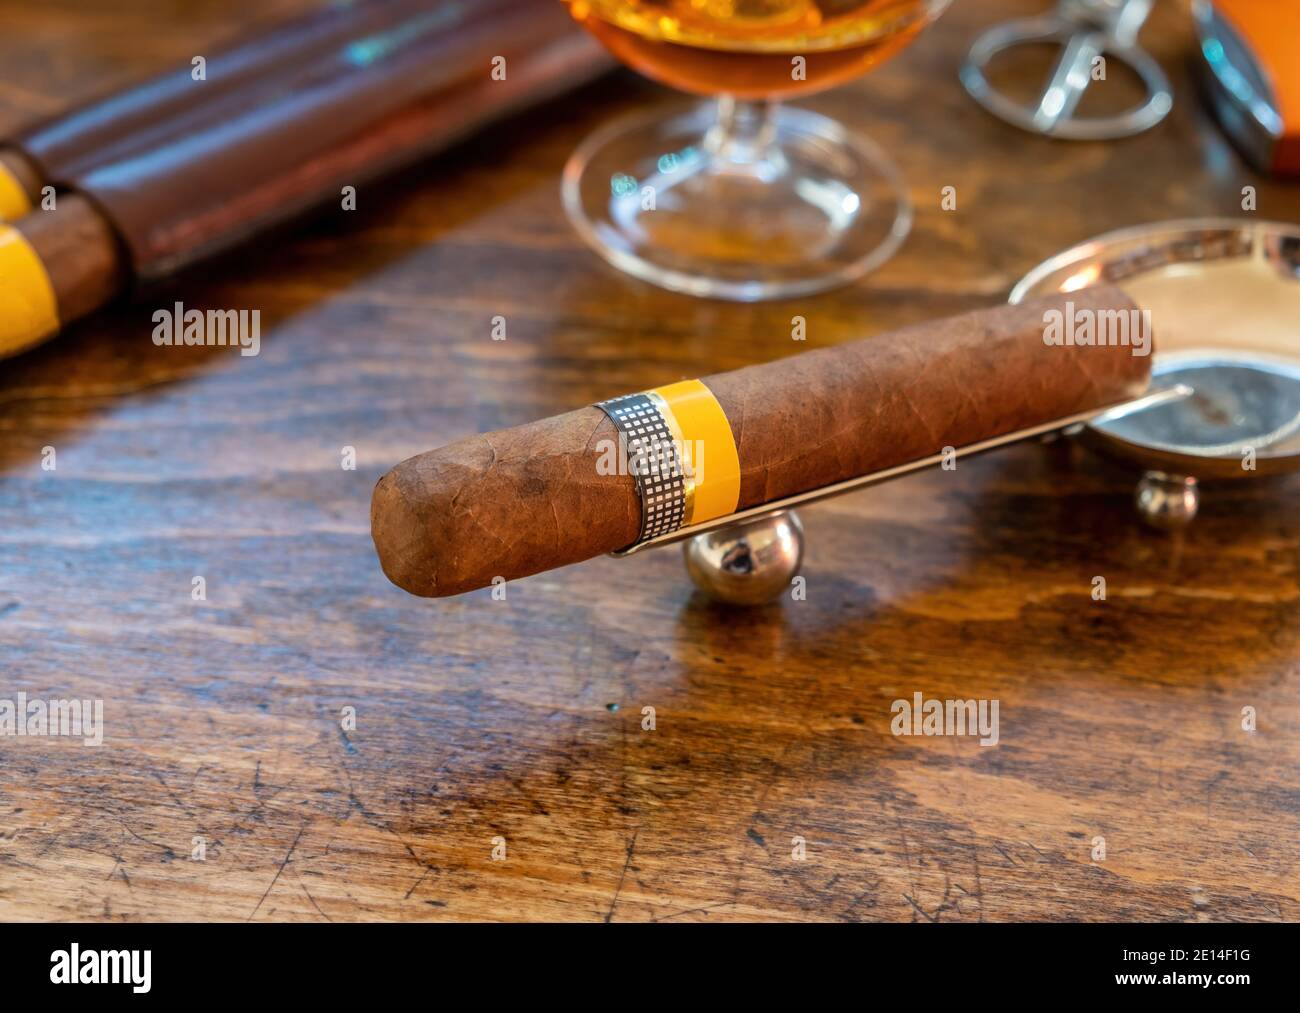 Tobacco and alcohol. Cigar and brandy on a wooden table, closeup view. Cuban quality brand cigar and rum, smoking and drinking luxury lifestyle Stock Photo